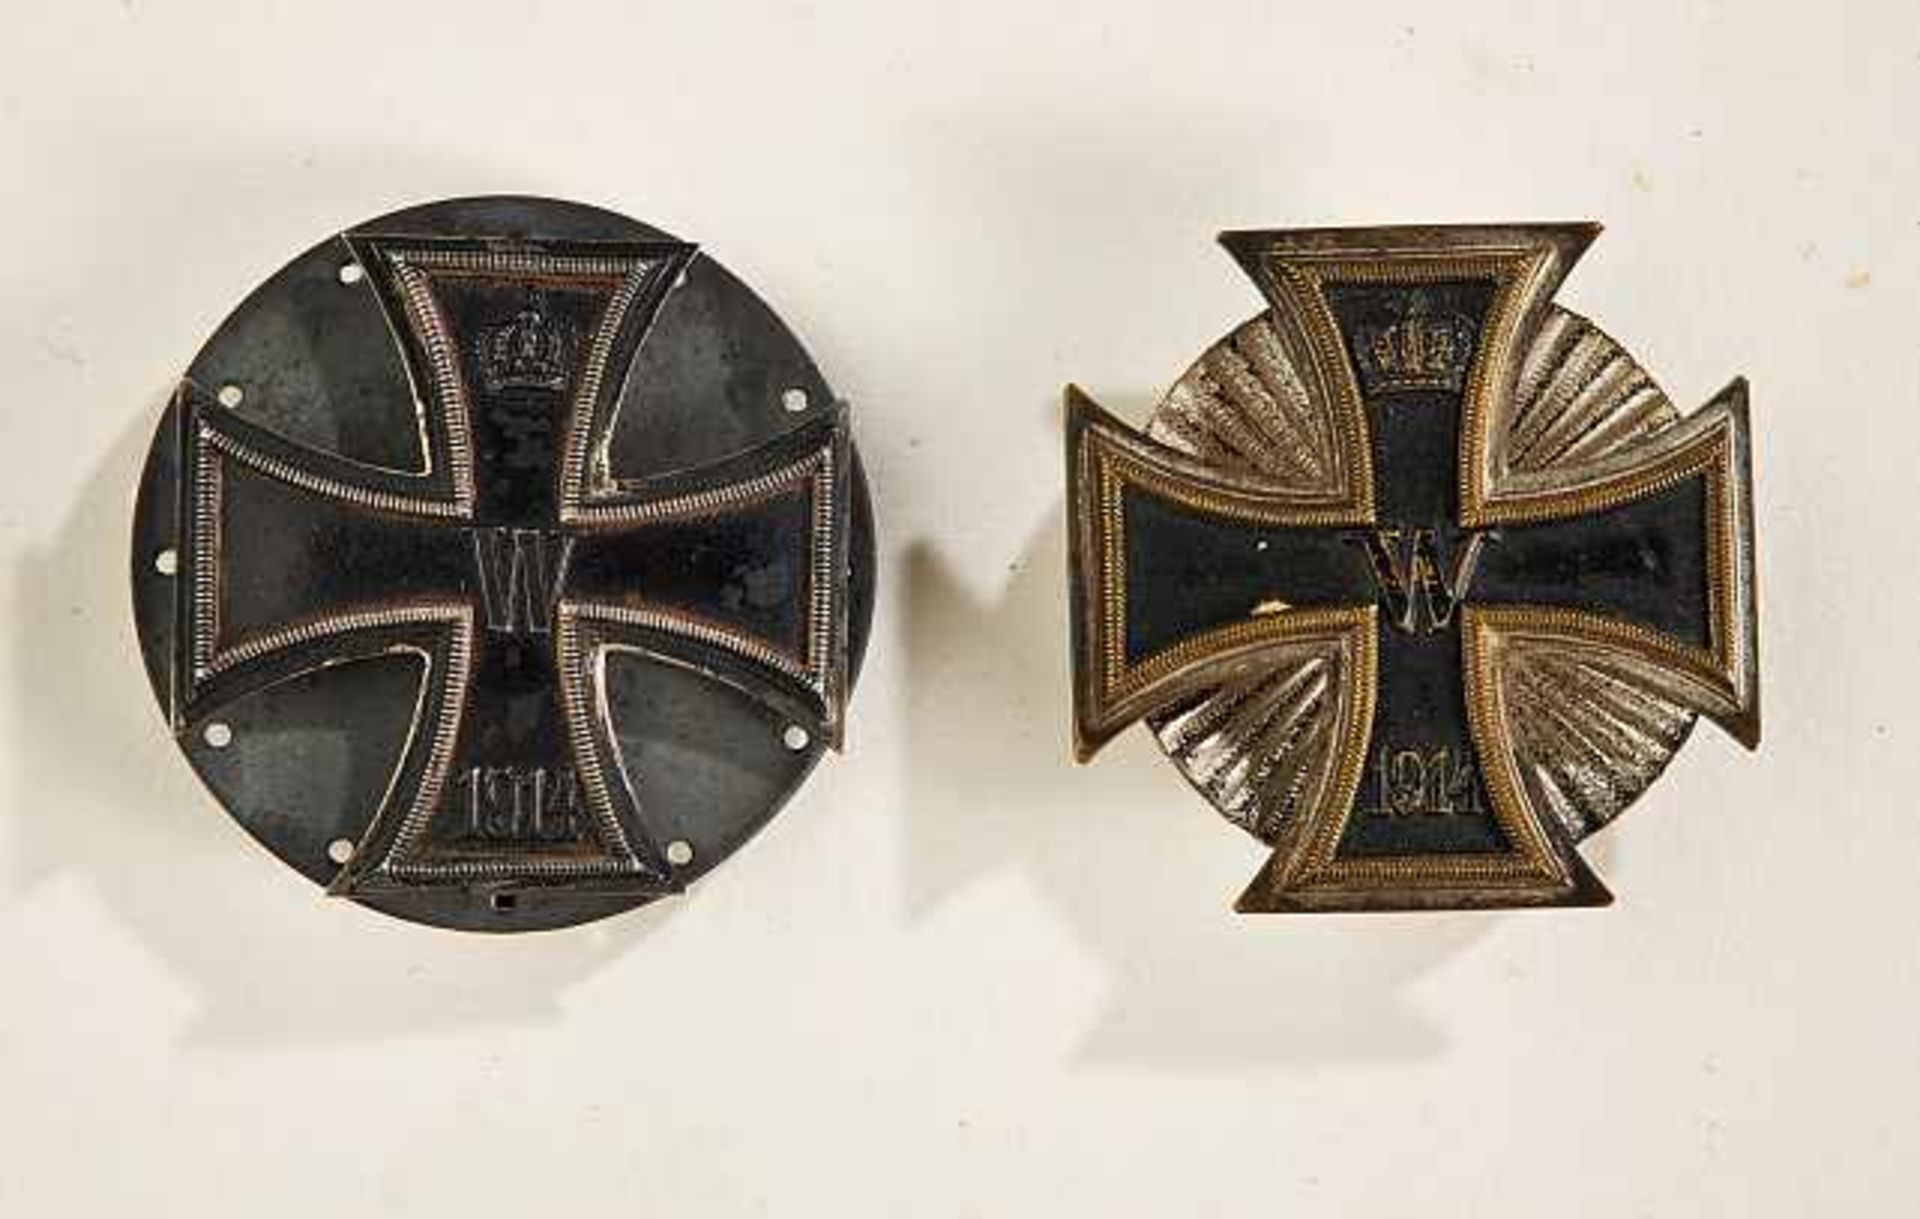 1.Weltkrieg : 1914 Iron Cross 1st Class.Cross shows wear/age and comes with screw back device.